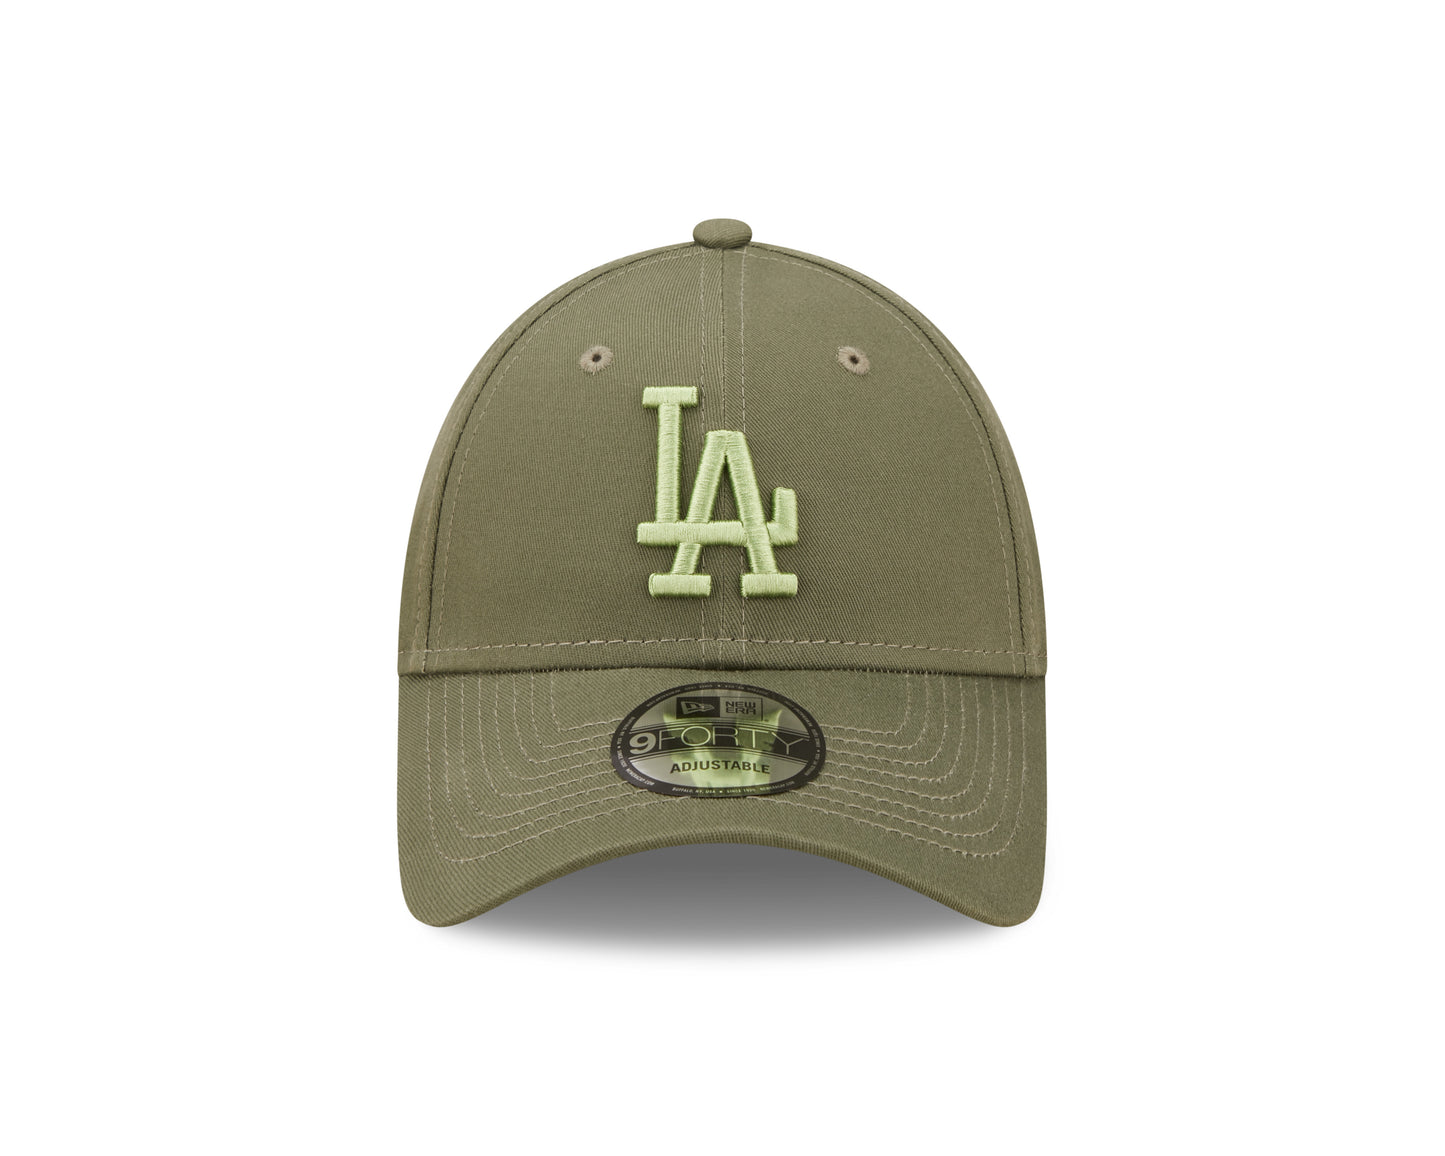 Los Angeles Dodgers 9Forty Cap League Essentials - Olive/Light Green